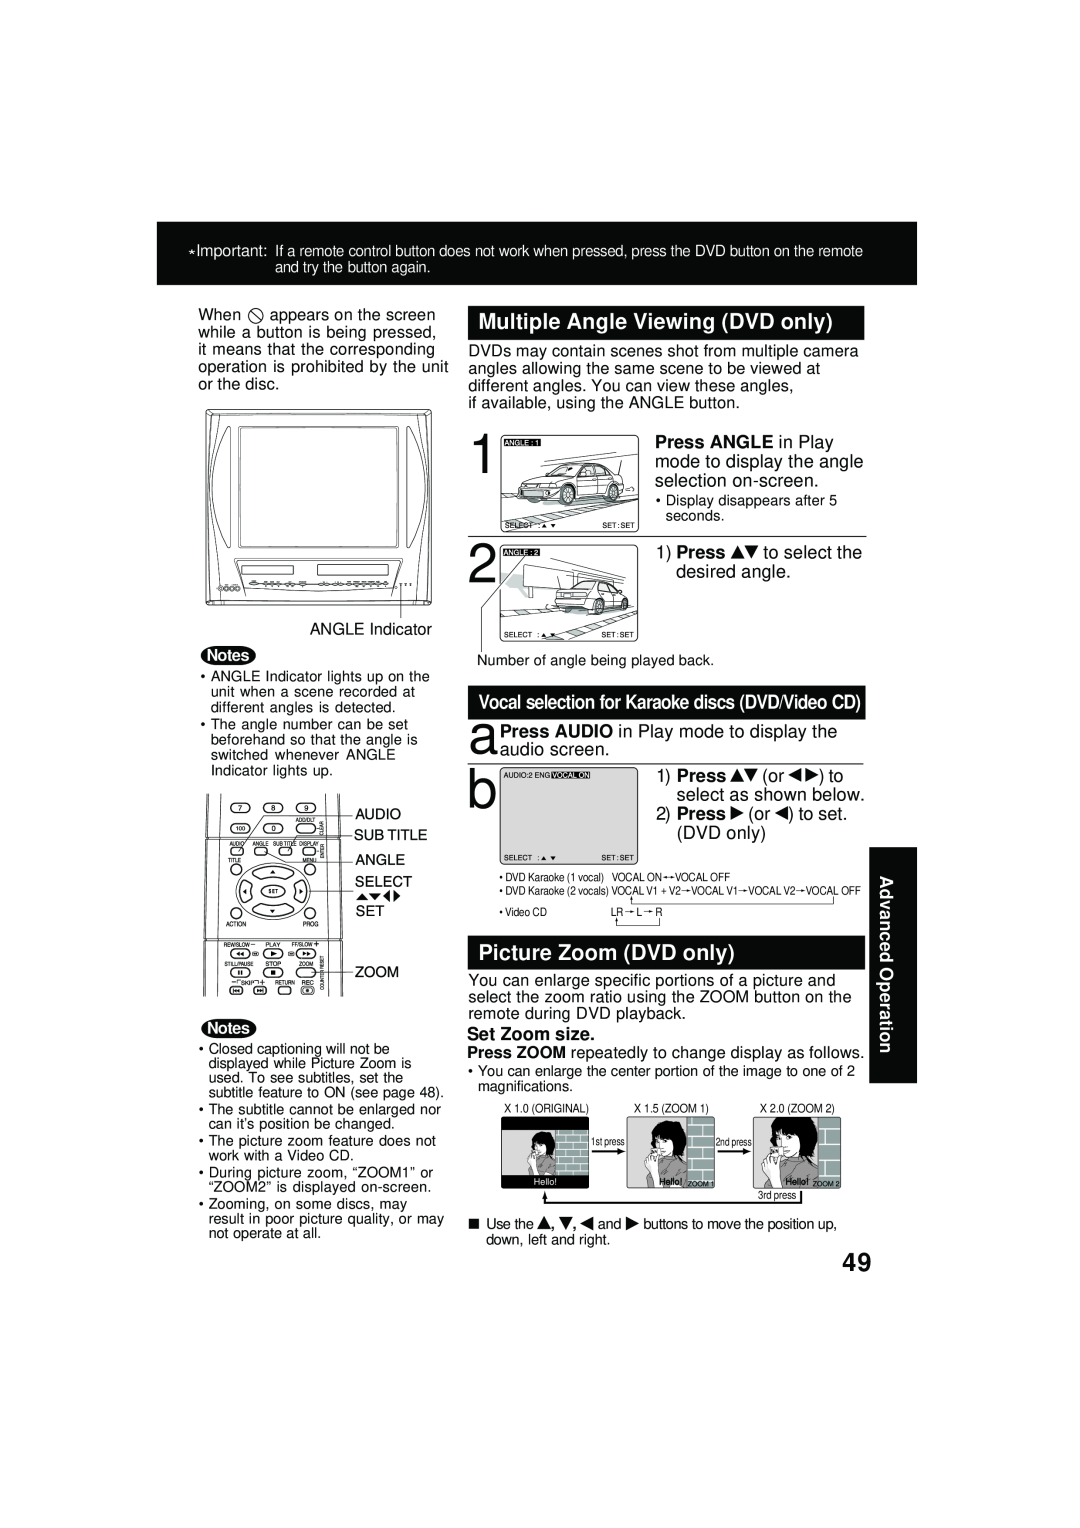 Panasonic PV DM2092 manual Multiple Angle Viewing DVD only, Picture Zoom DVD only, Press ANGLE in Play, Set Zoom size 